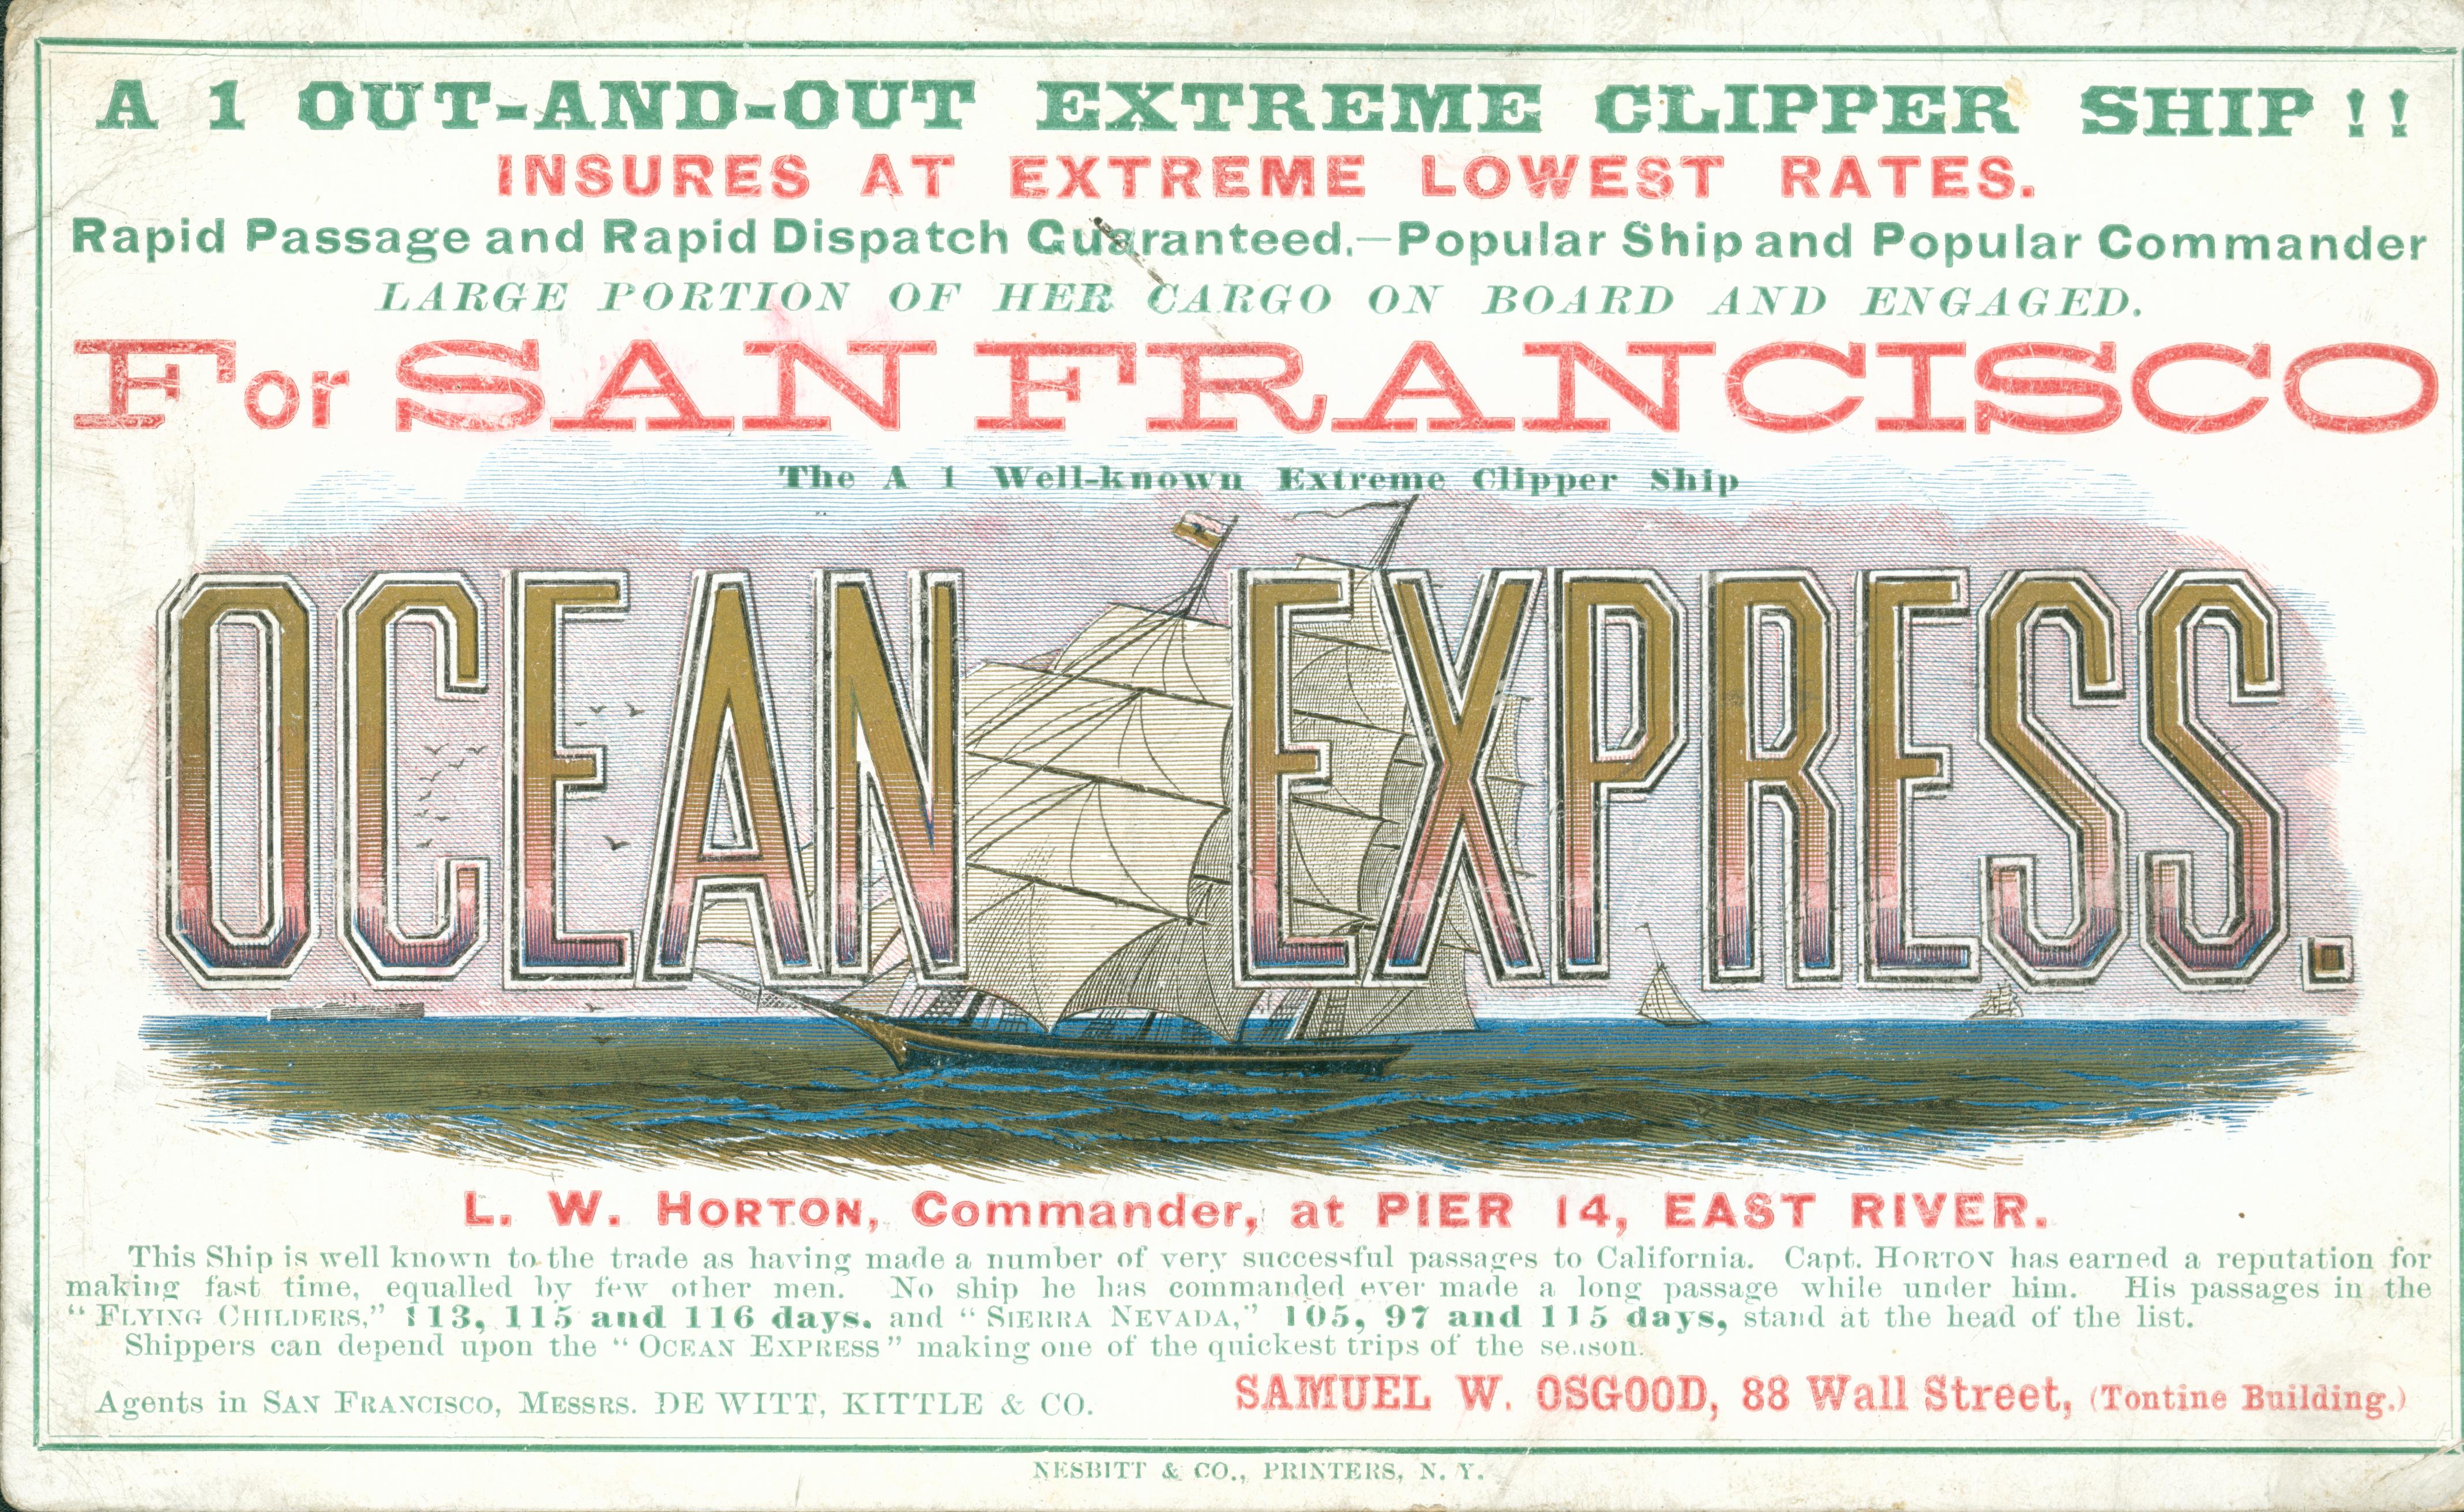 Shows a ship under sail, behind lettering